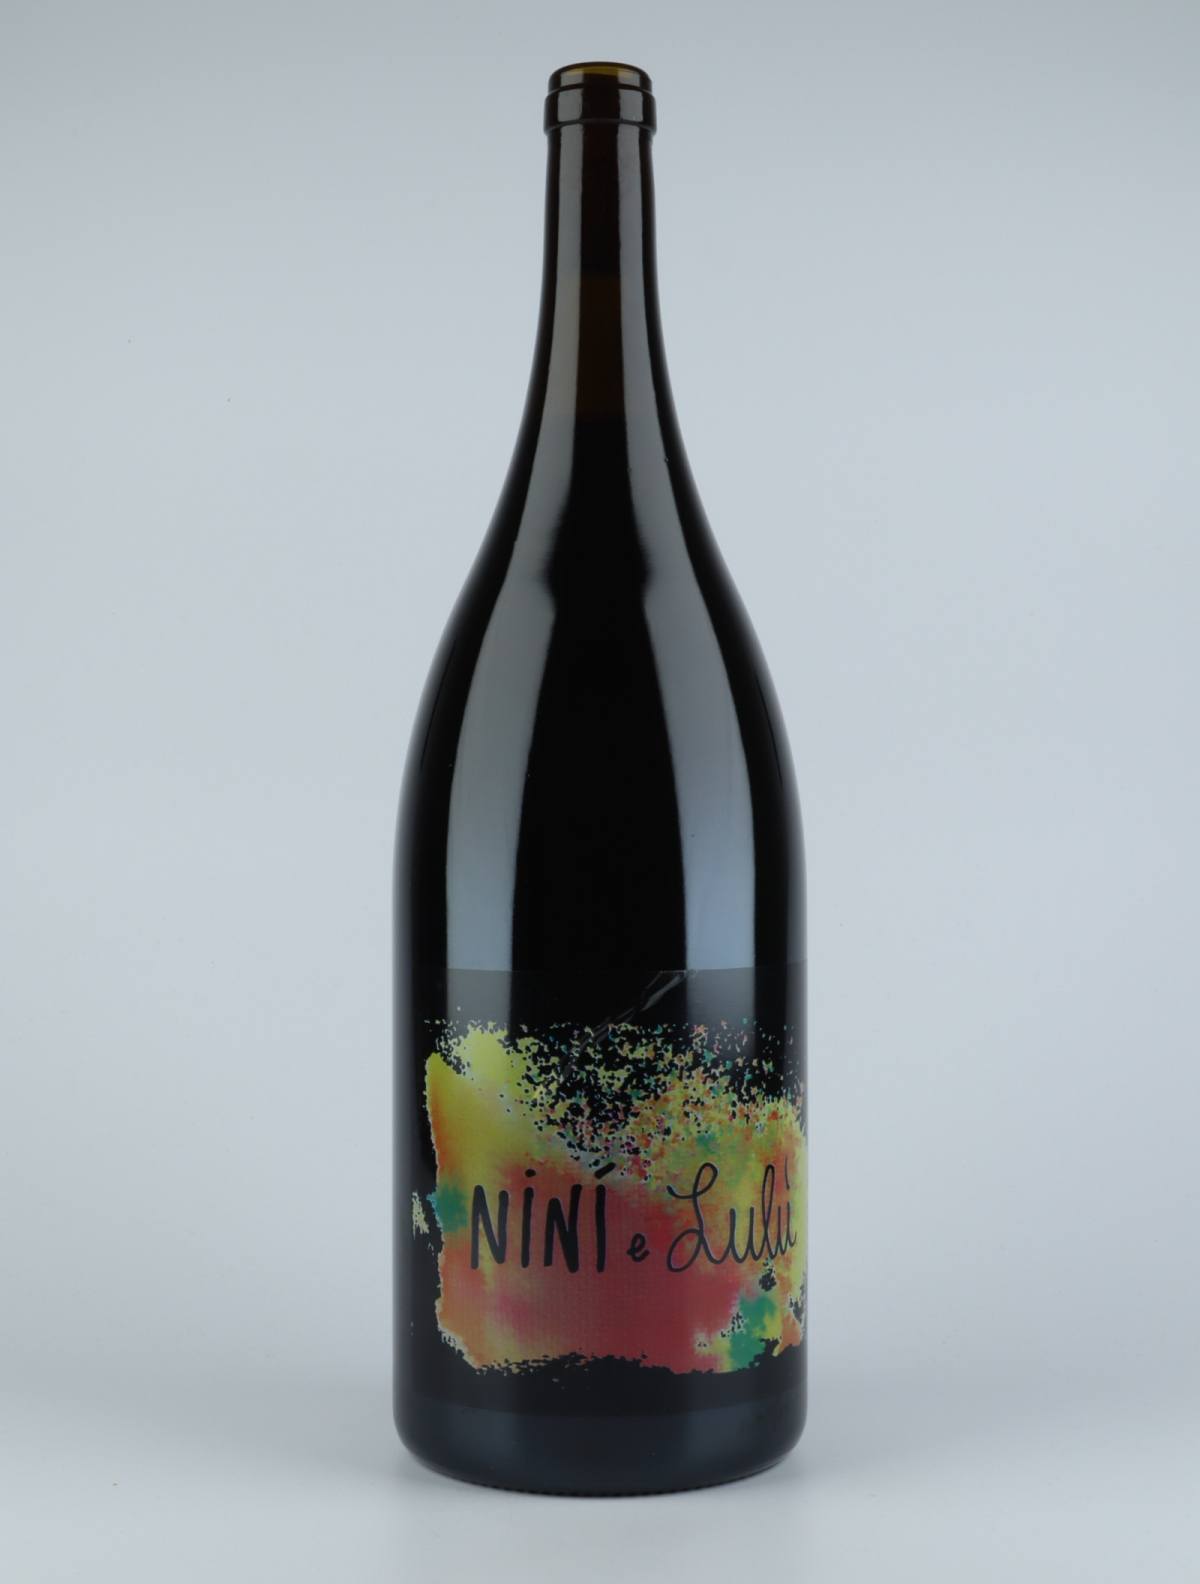 A bottle 2018 Ninì e Lulù Red wine from Le Coste, Lazio in Italy